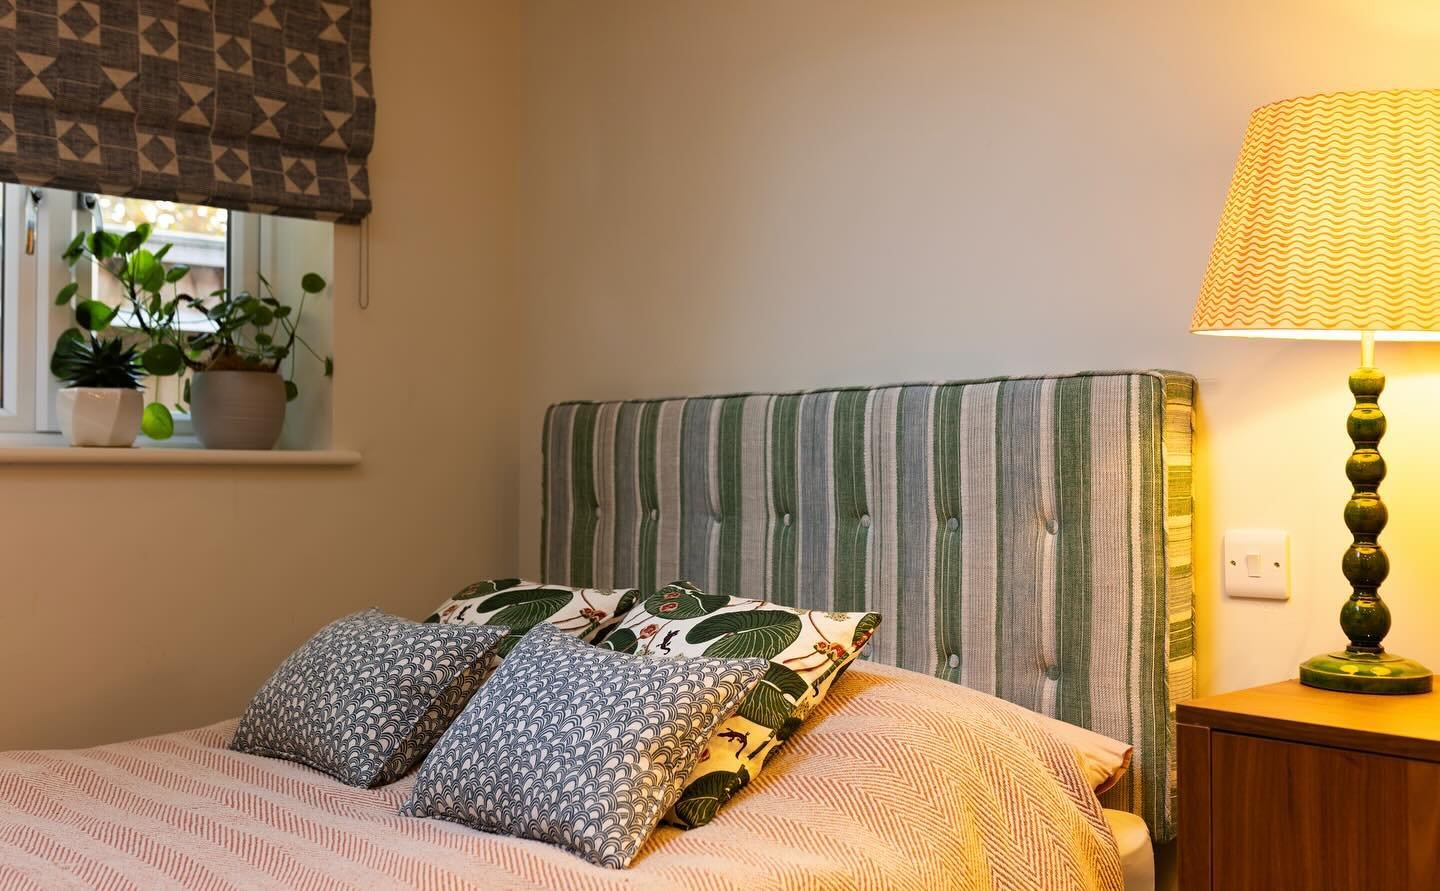 The first of the long May weekends so time to relax.  Celebrating mixing fabrics in this peaceful room in a modern house we recently refurbished and extended.  @raptureandwright @fermoie @fannyshorter, cushions and blinds made by @westcothouse.

Phot